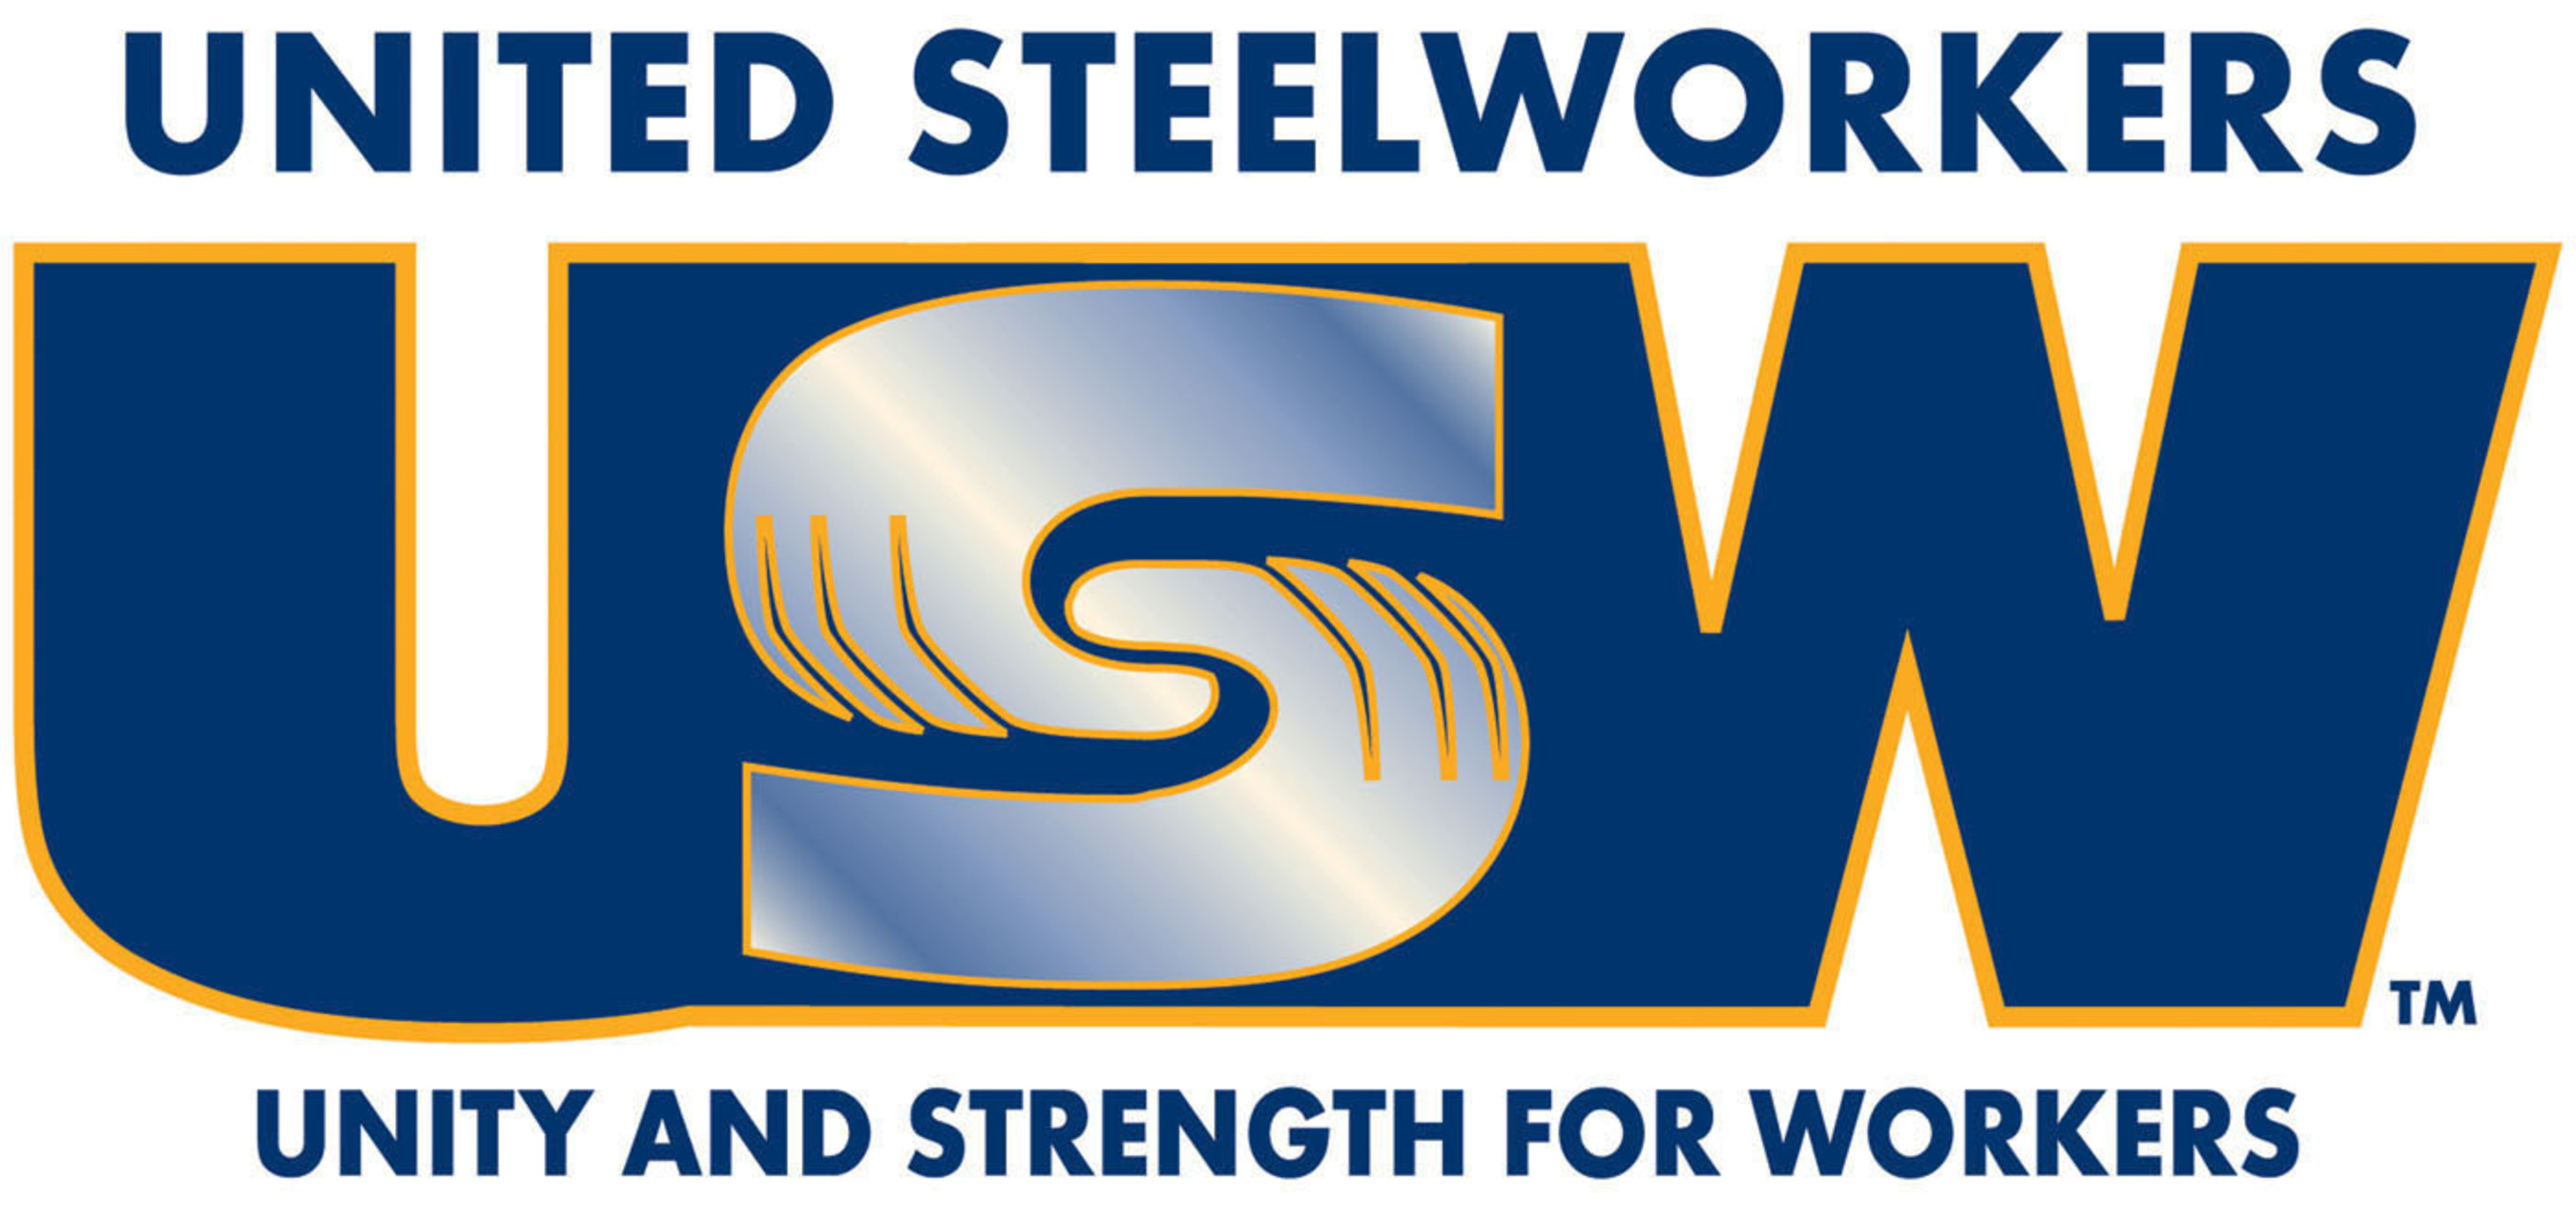 United Steelworkers (USW)